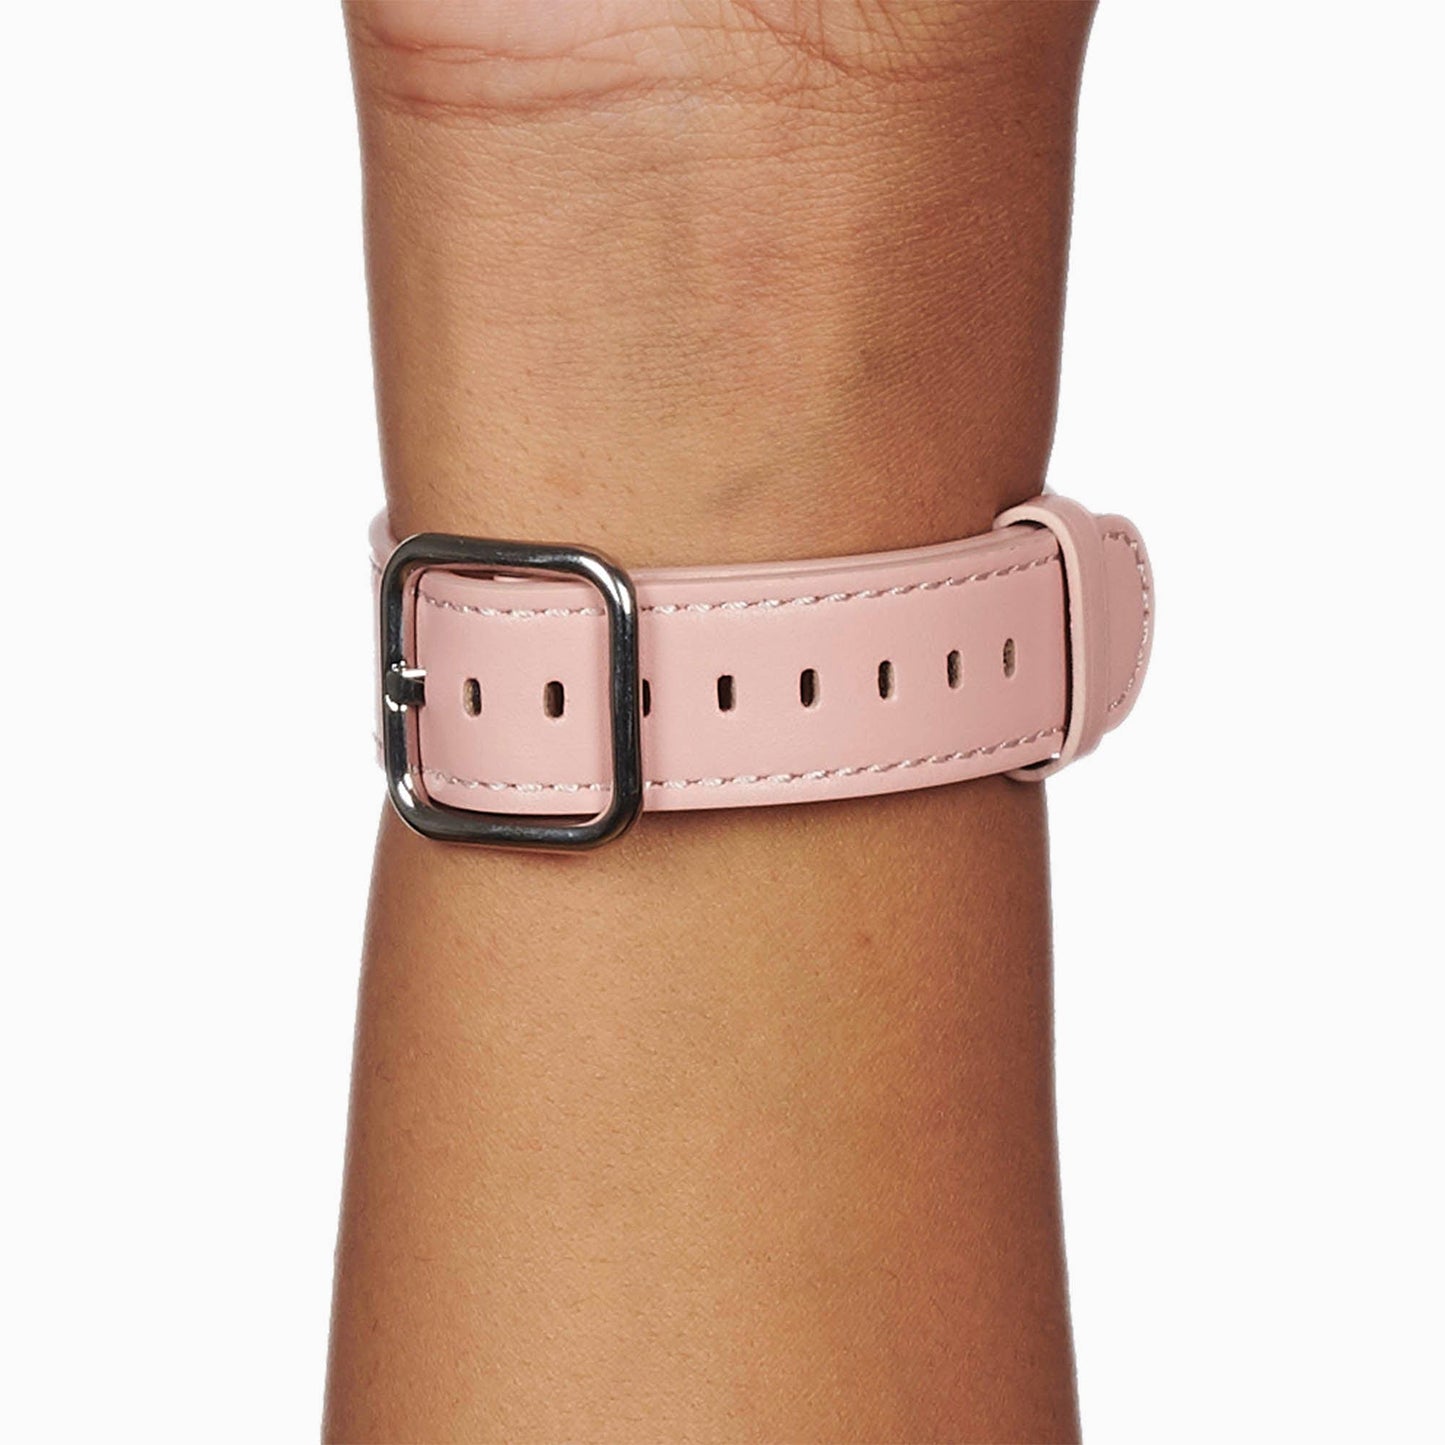 Soft Pink Contemporary Buckle for Apple Watch